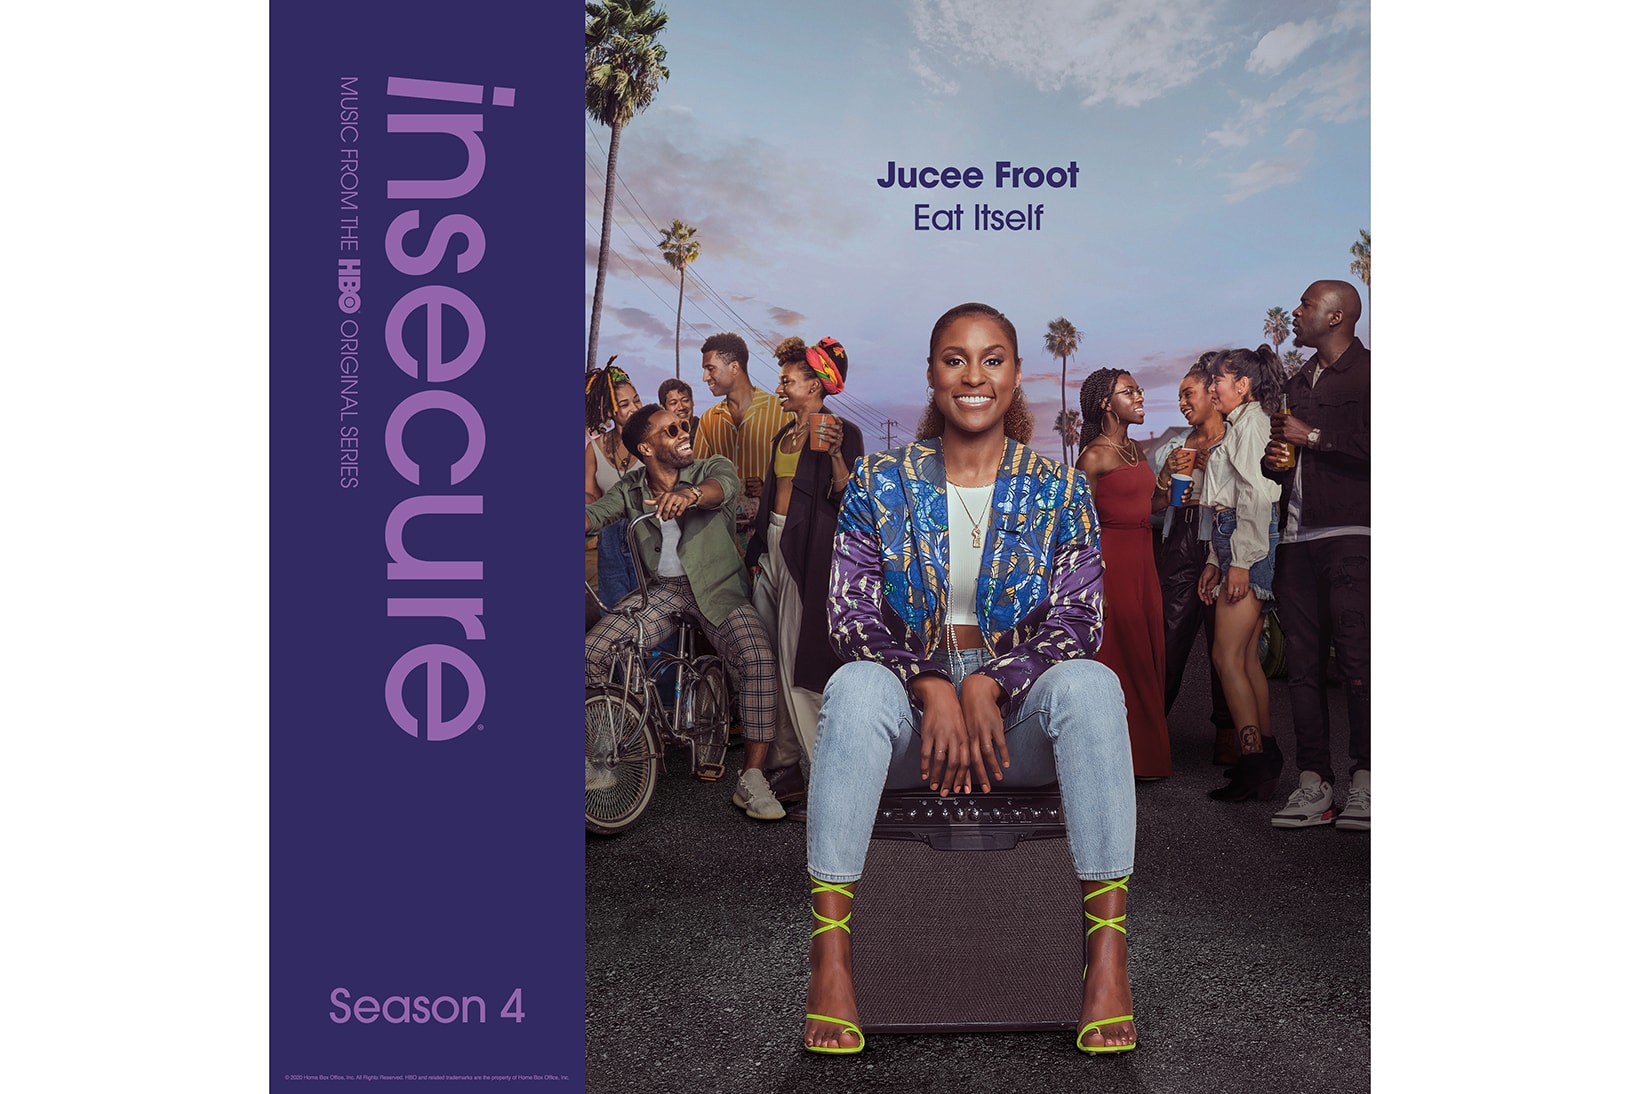 jucee froot eat itself single track hbo insecure season 4 soundtrack issa rae